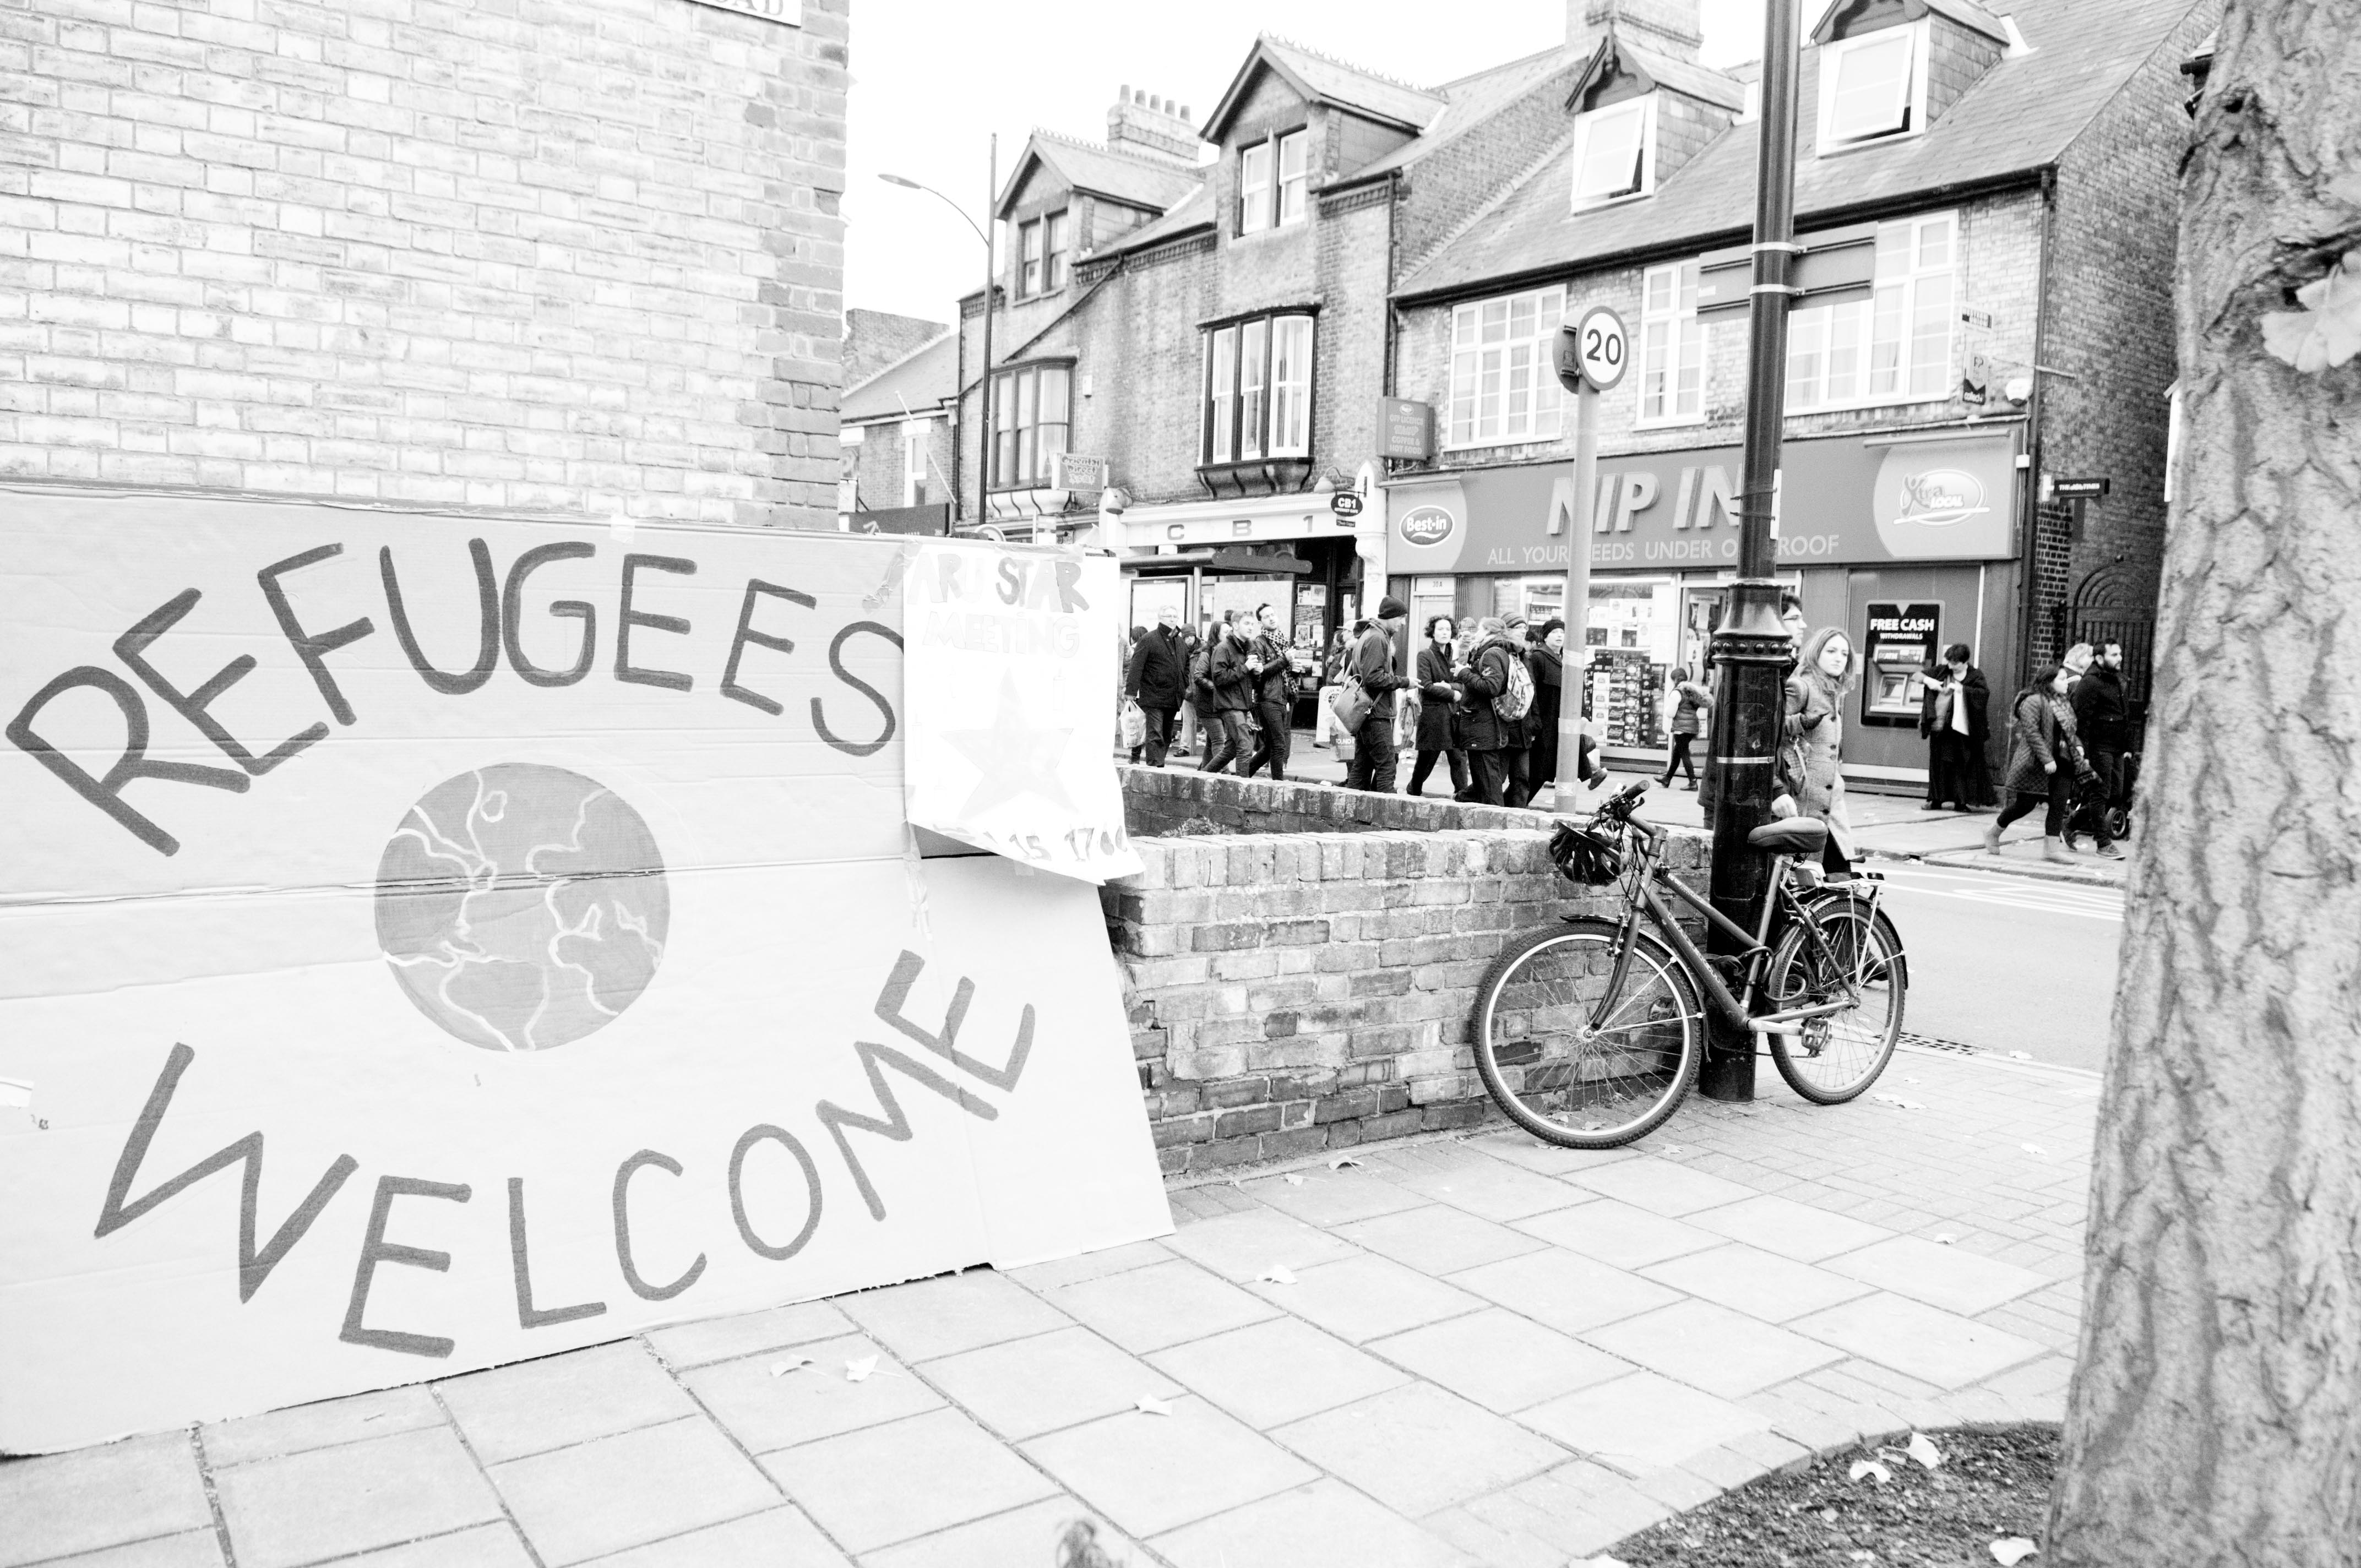 A march along Mill Road supporting refugees and asylum seekers in Cambridge, with a large sign leaning against a wall that says 'Refugees welcome'. Photo copyright Chris Cellier Photography www.chriscellier.com and used with permission.